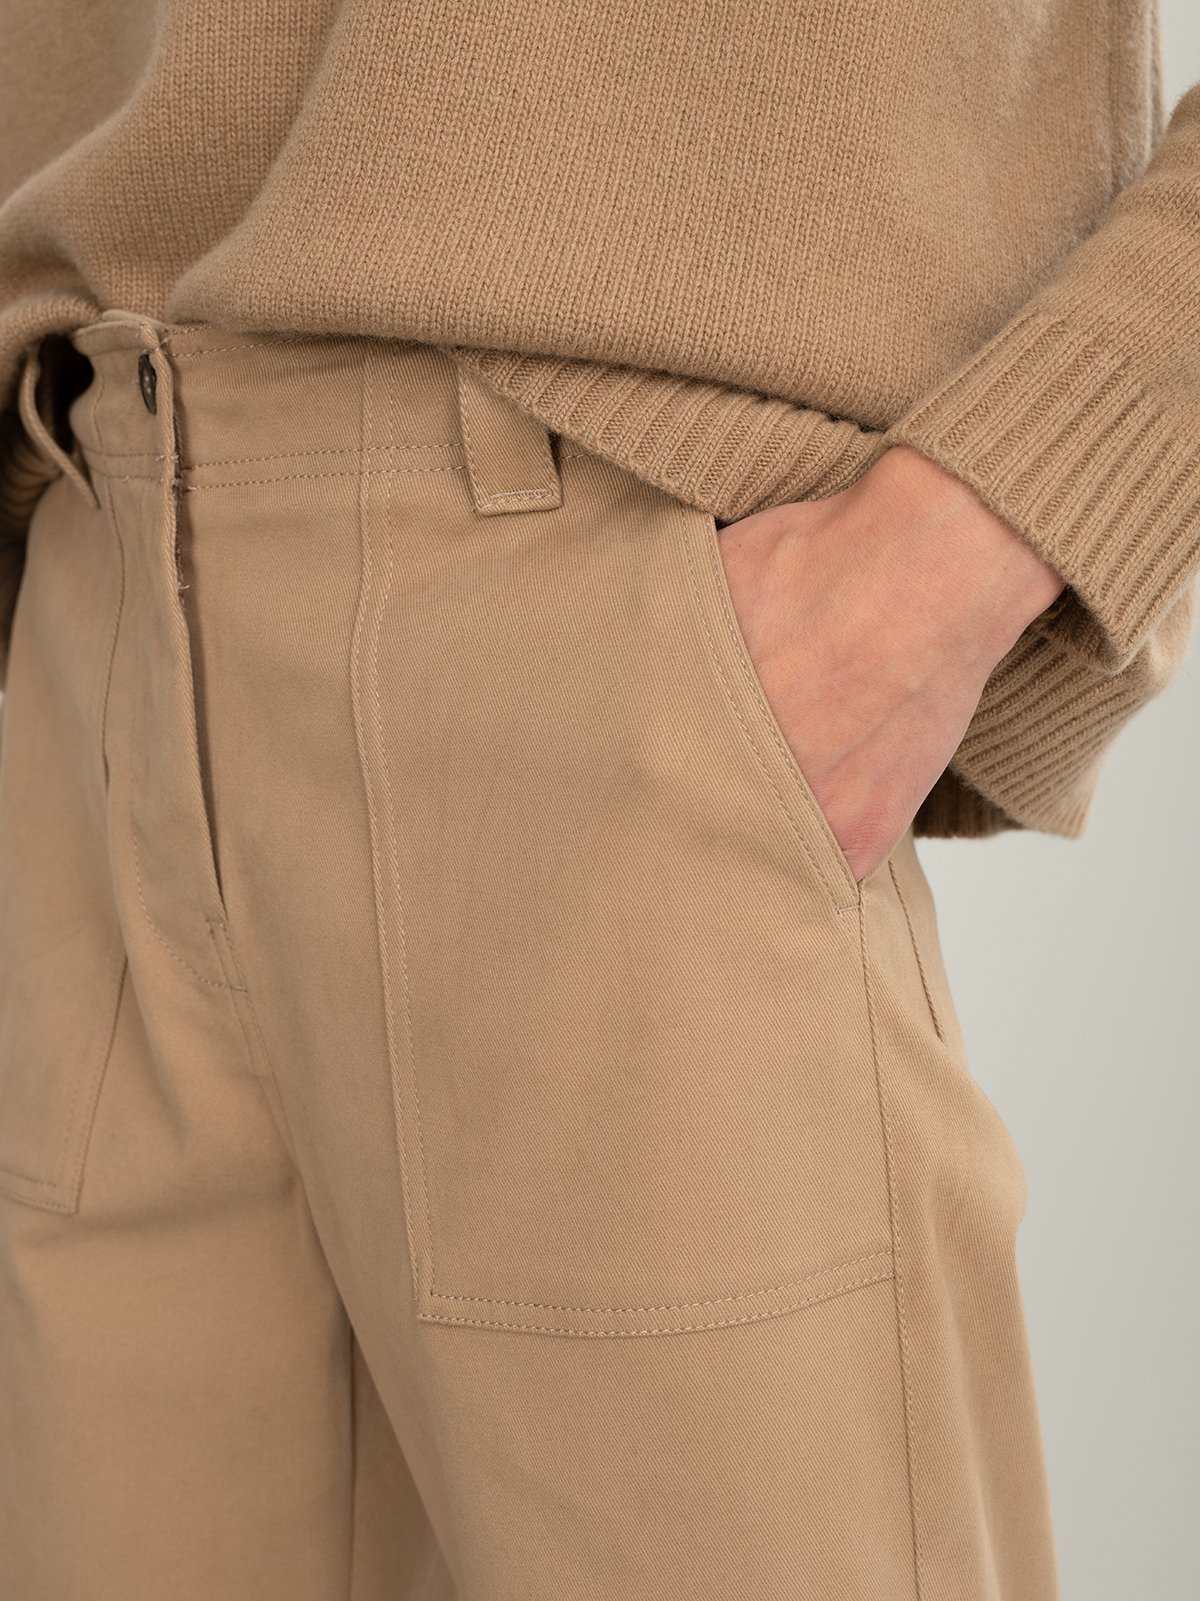 Tan Cargo Pocket Trousers by Max Mara on Sale